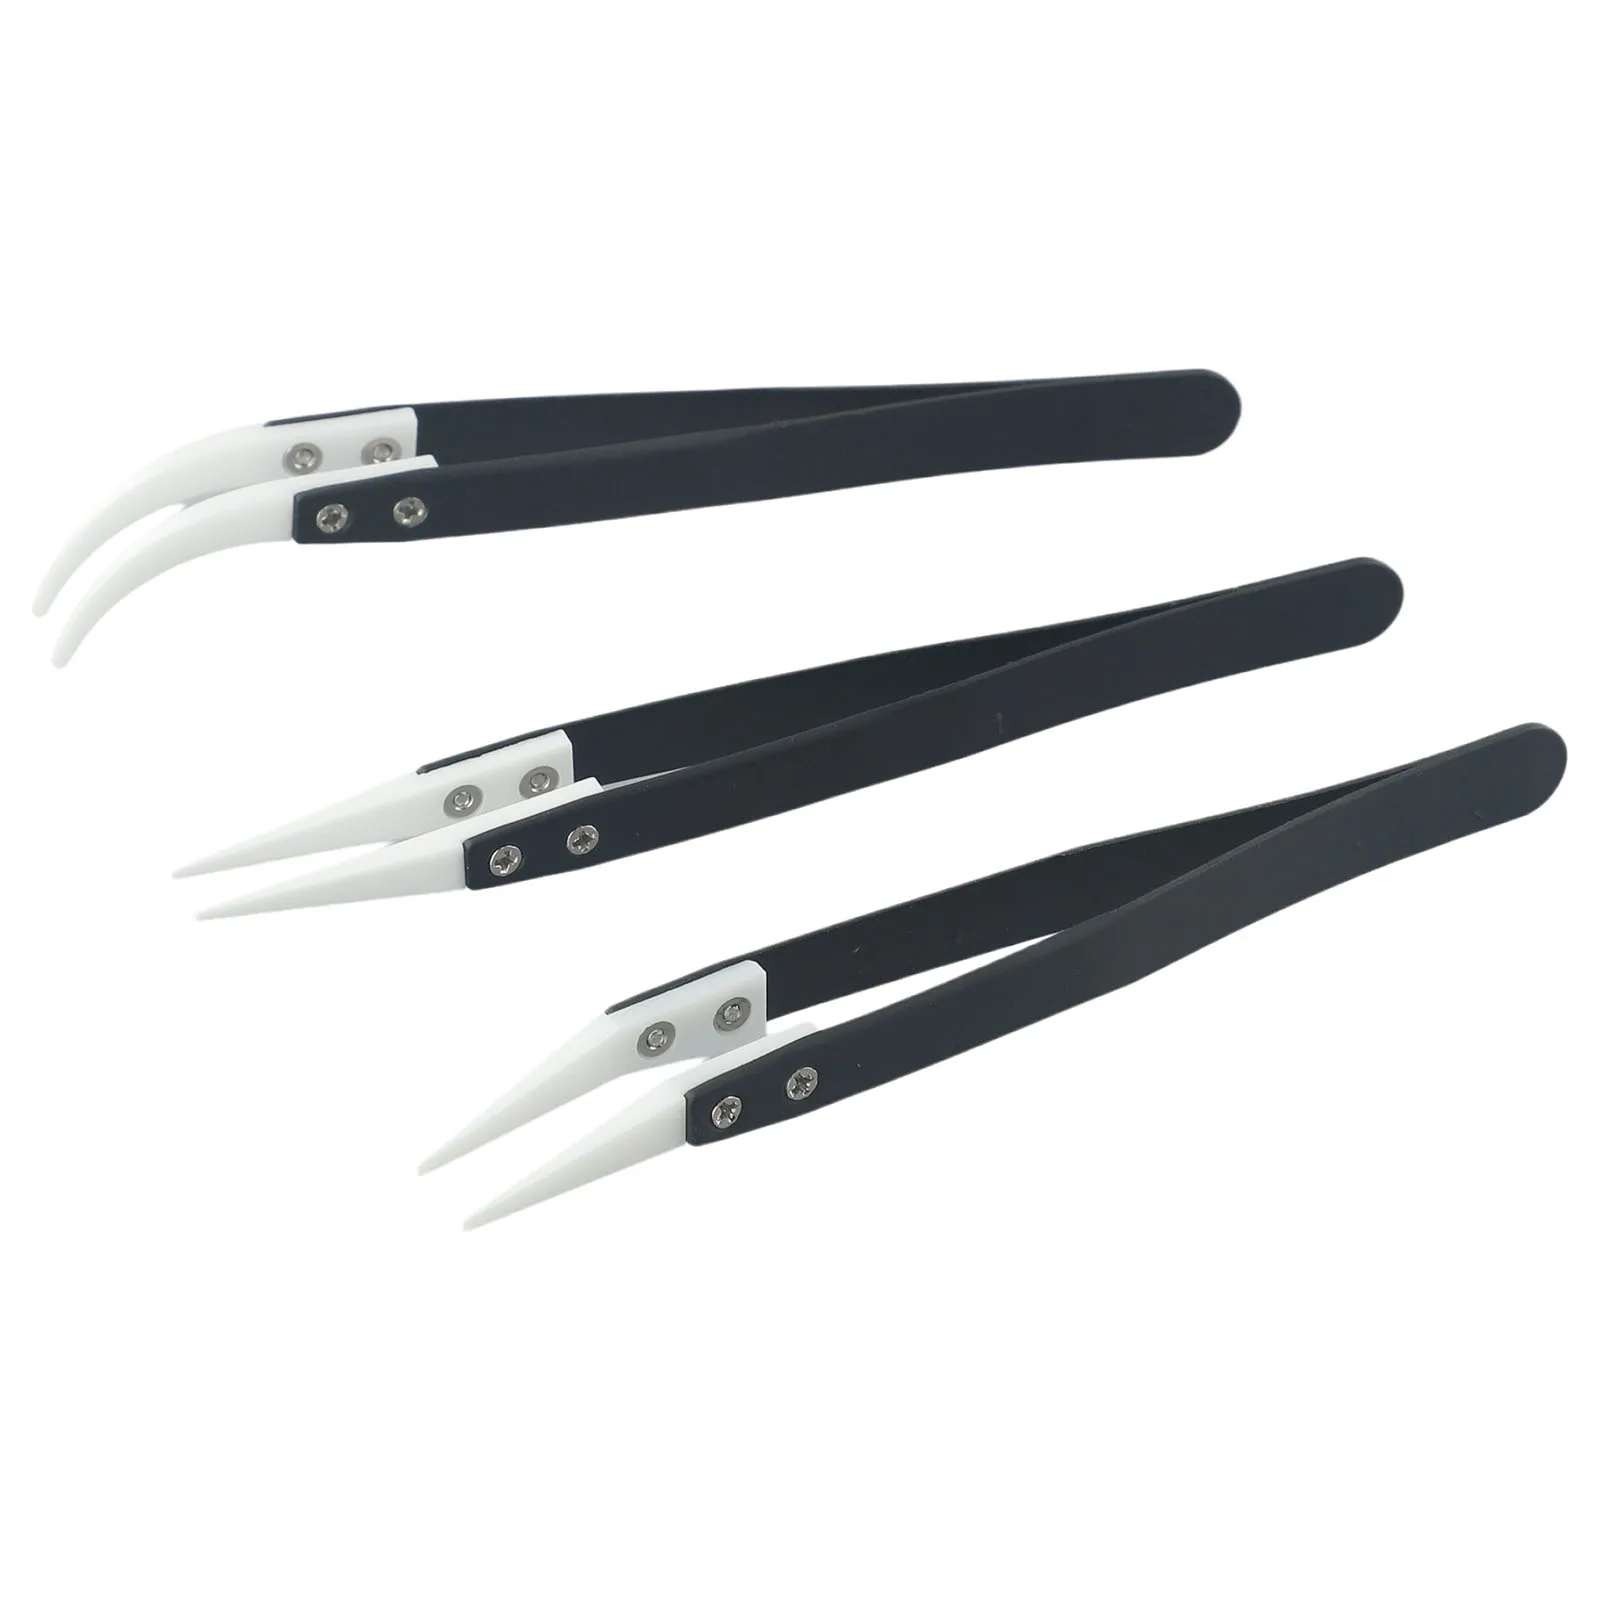 

3pcs Ceramic Reverse Tweezers Little Curved/Big Curved/Straight Tweezer Stainless Steel Non-Conductive Heat Resistant Hand Tools